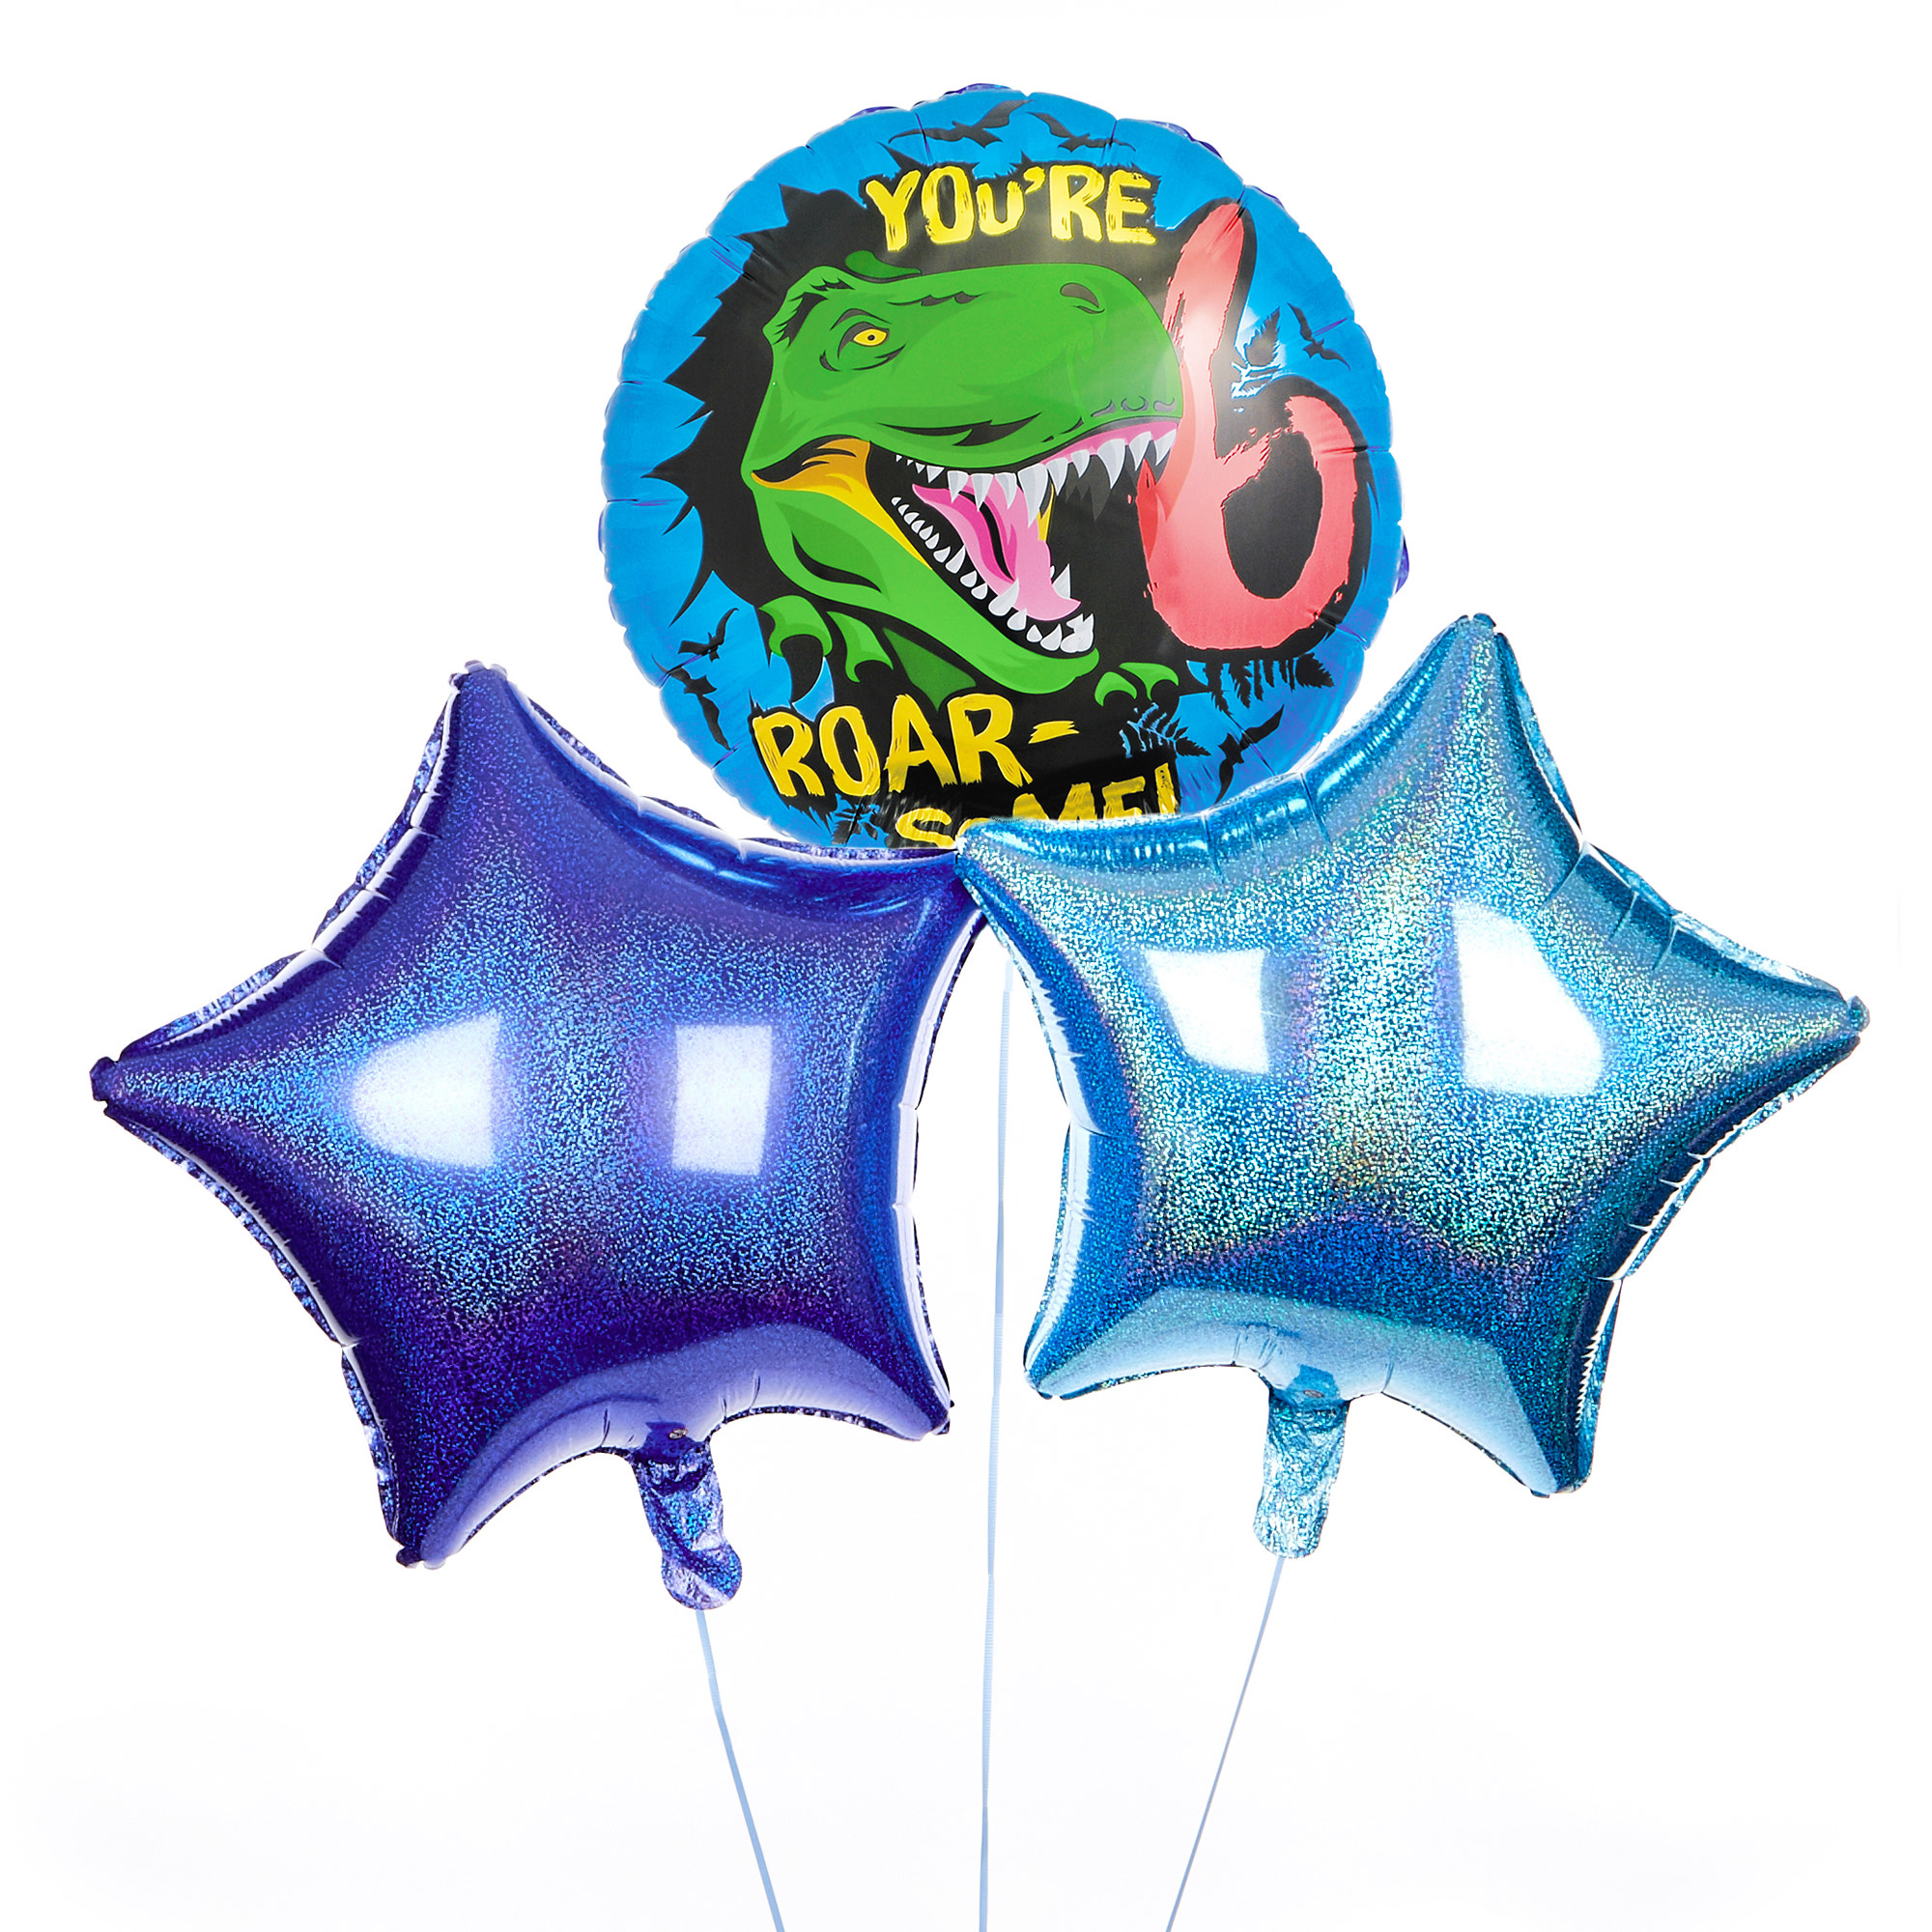 Roar-Some 6th Birthday Balloon Bouquet - DELIVERED INFLATED!